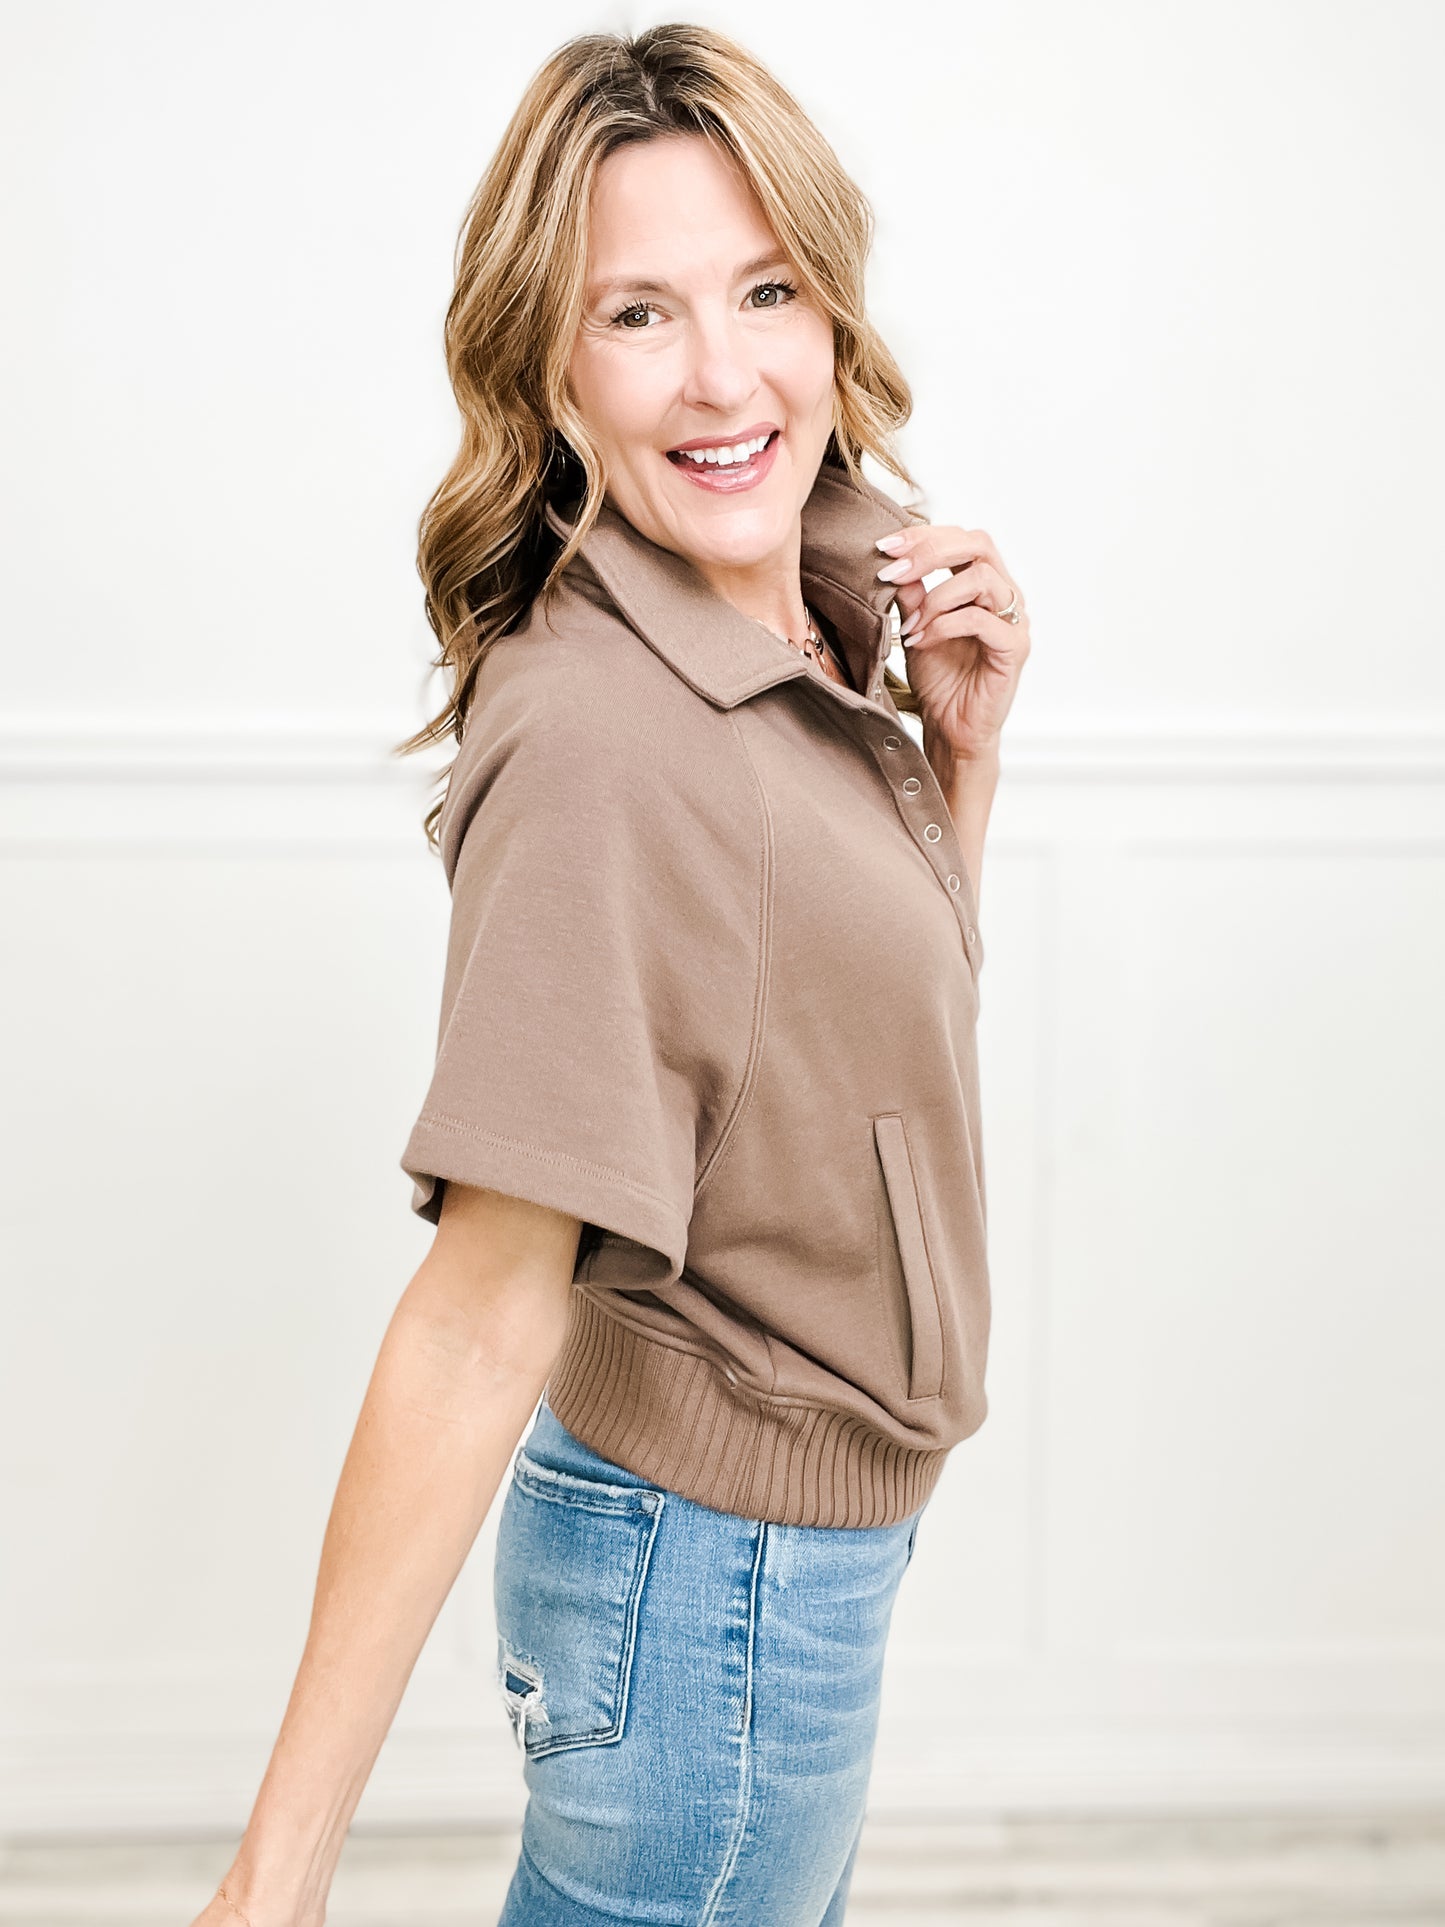 Give Me All Your Love Short Sleeve Collared Top with Snap Button Neckline-Group C